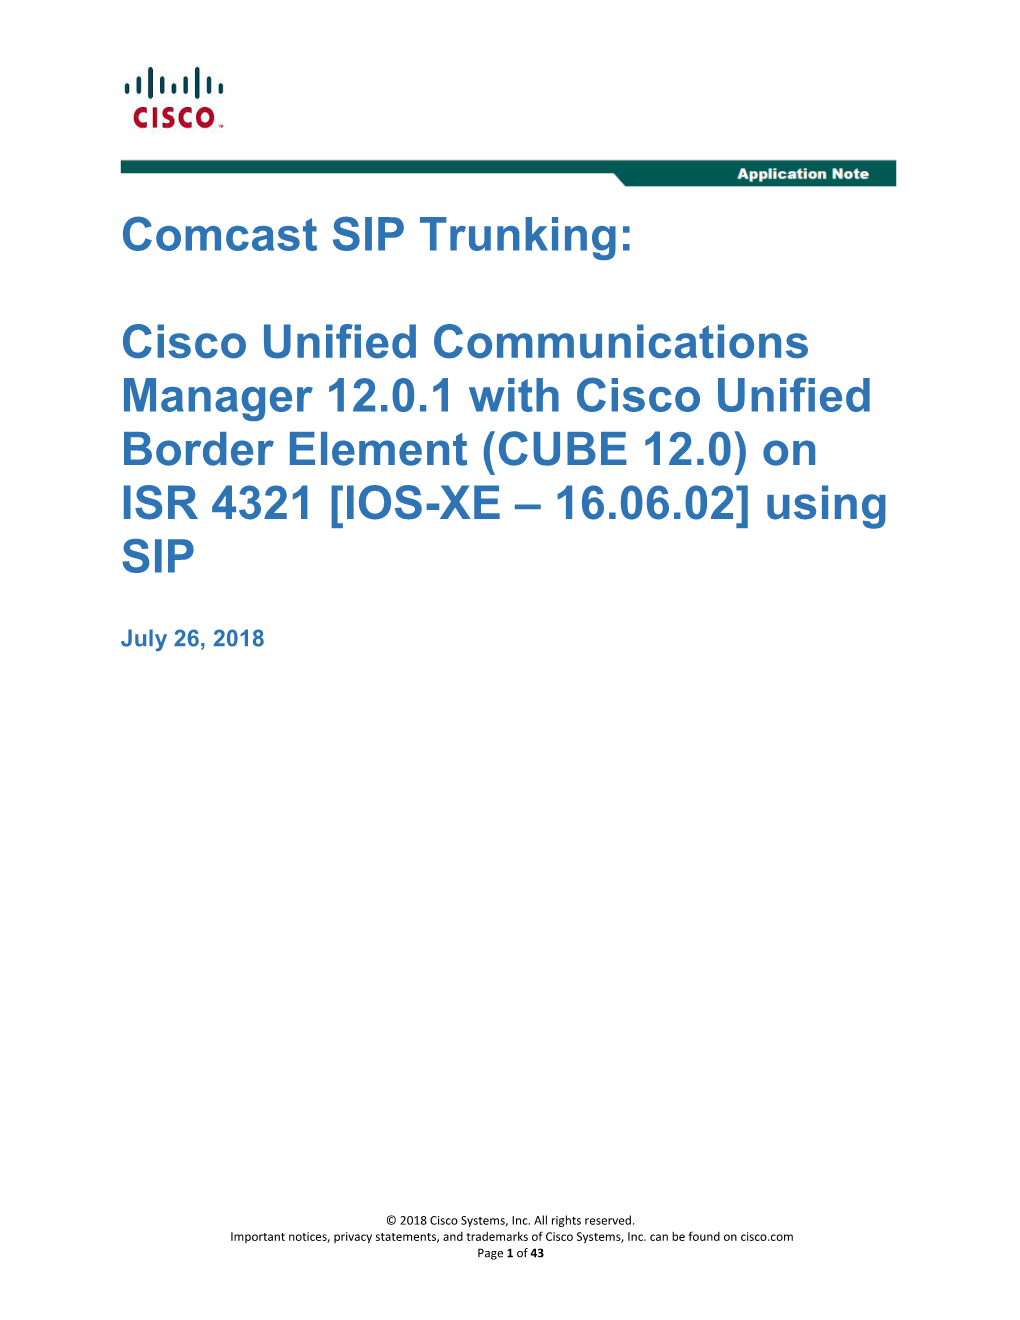 Comcast SIP Trunking